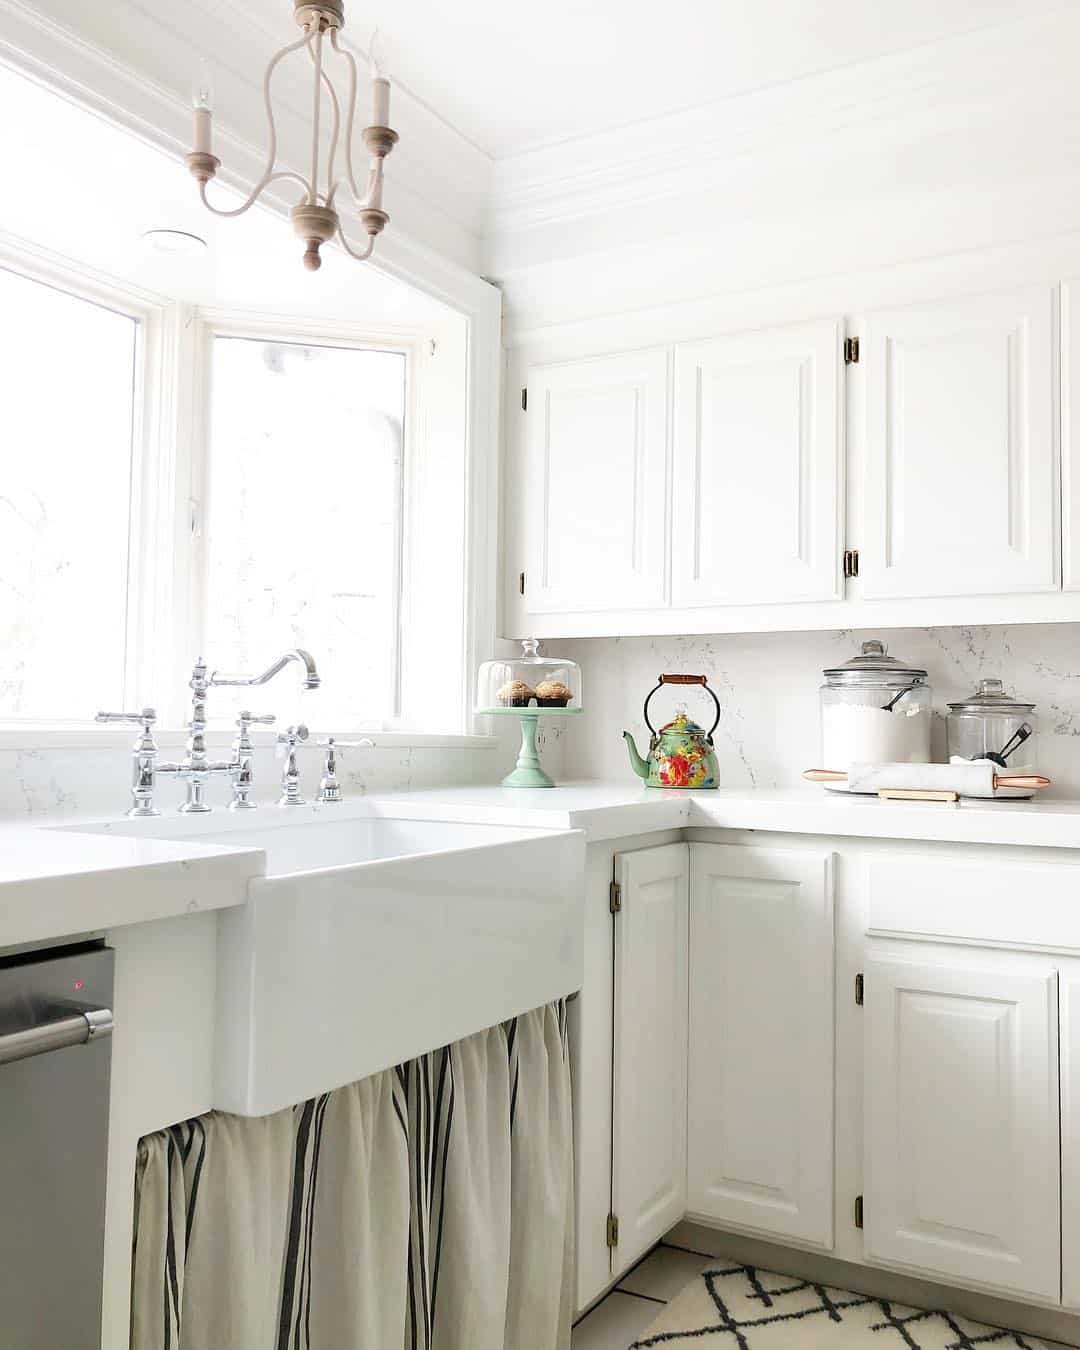 Radiance Over the Farmhouse Sink